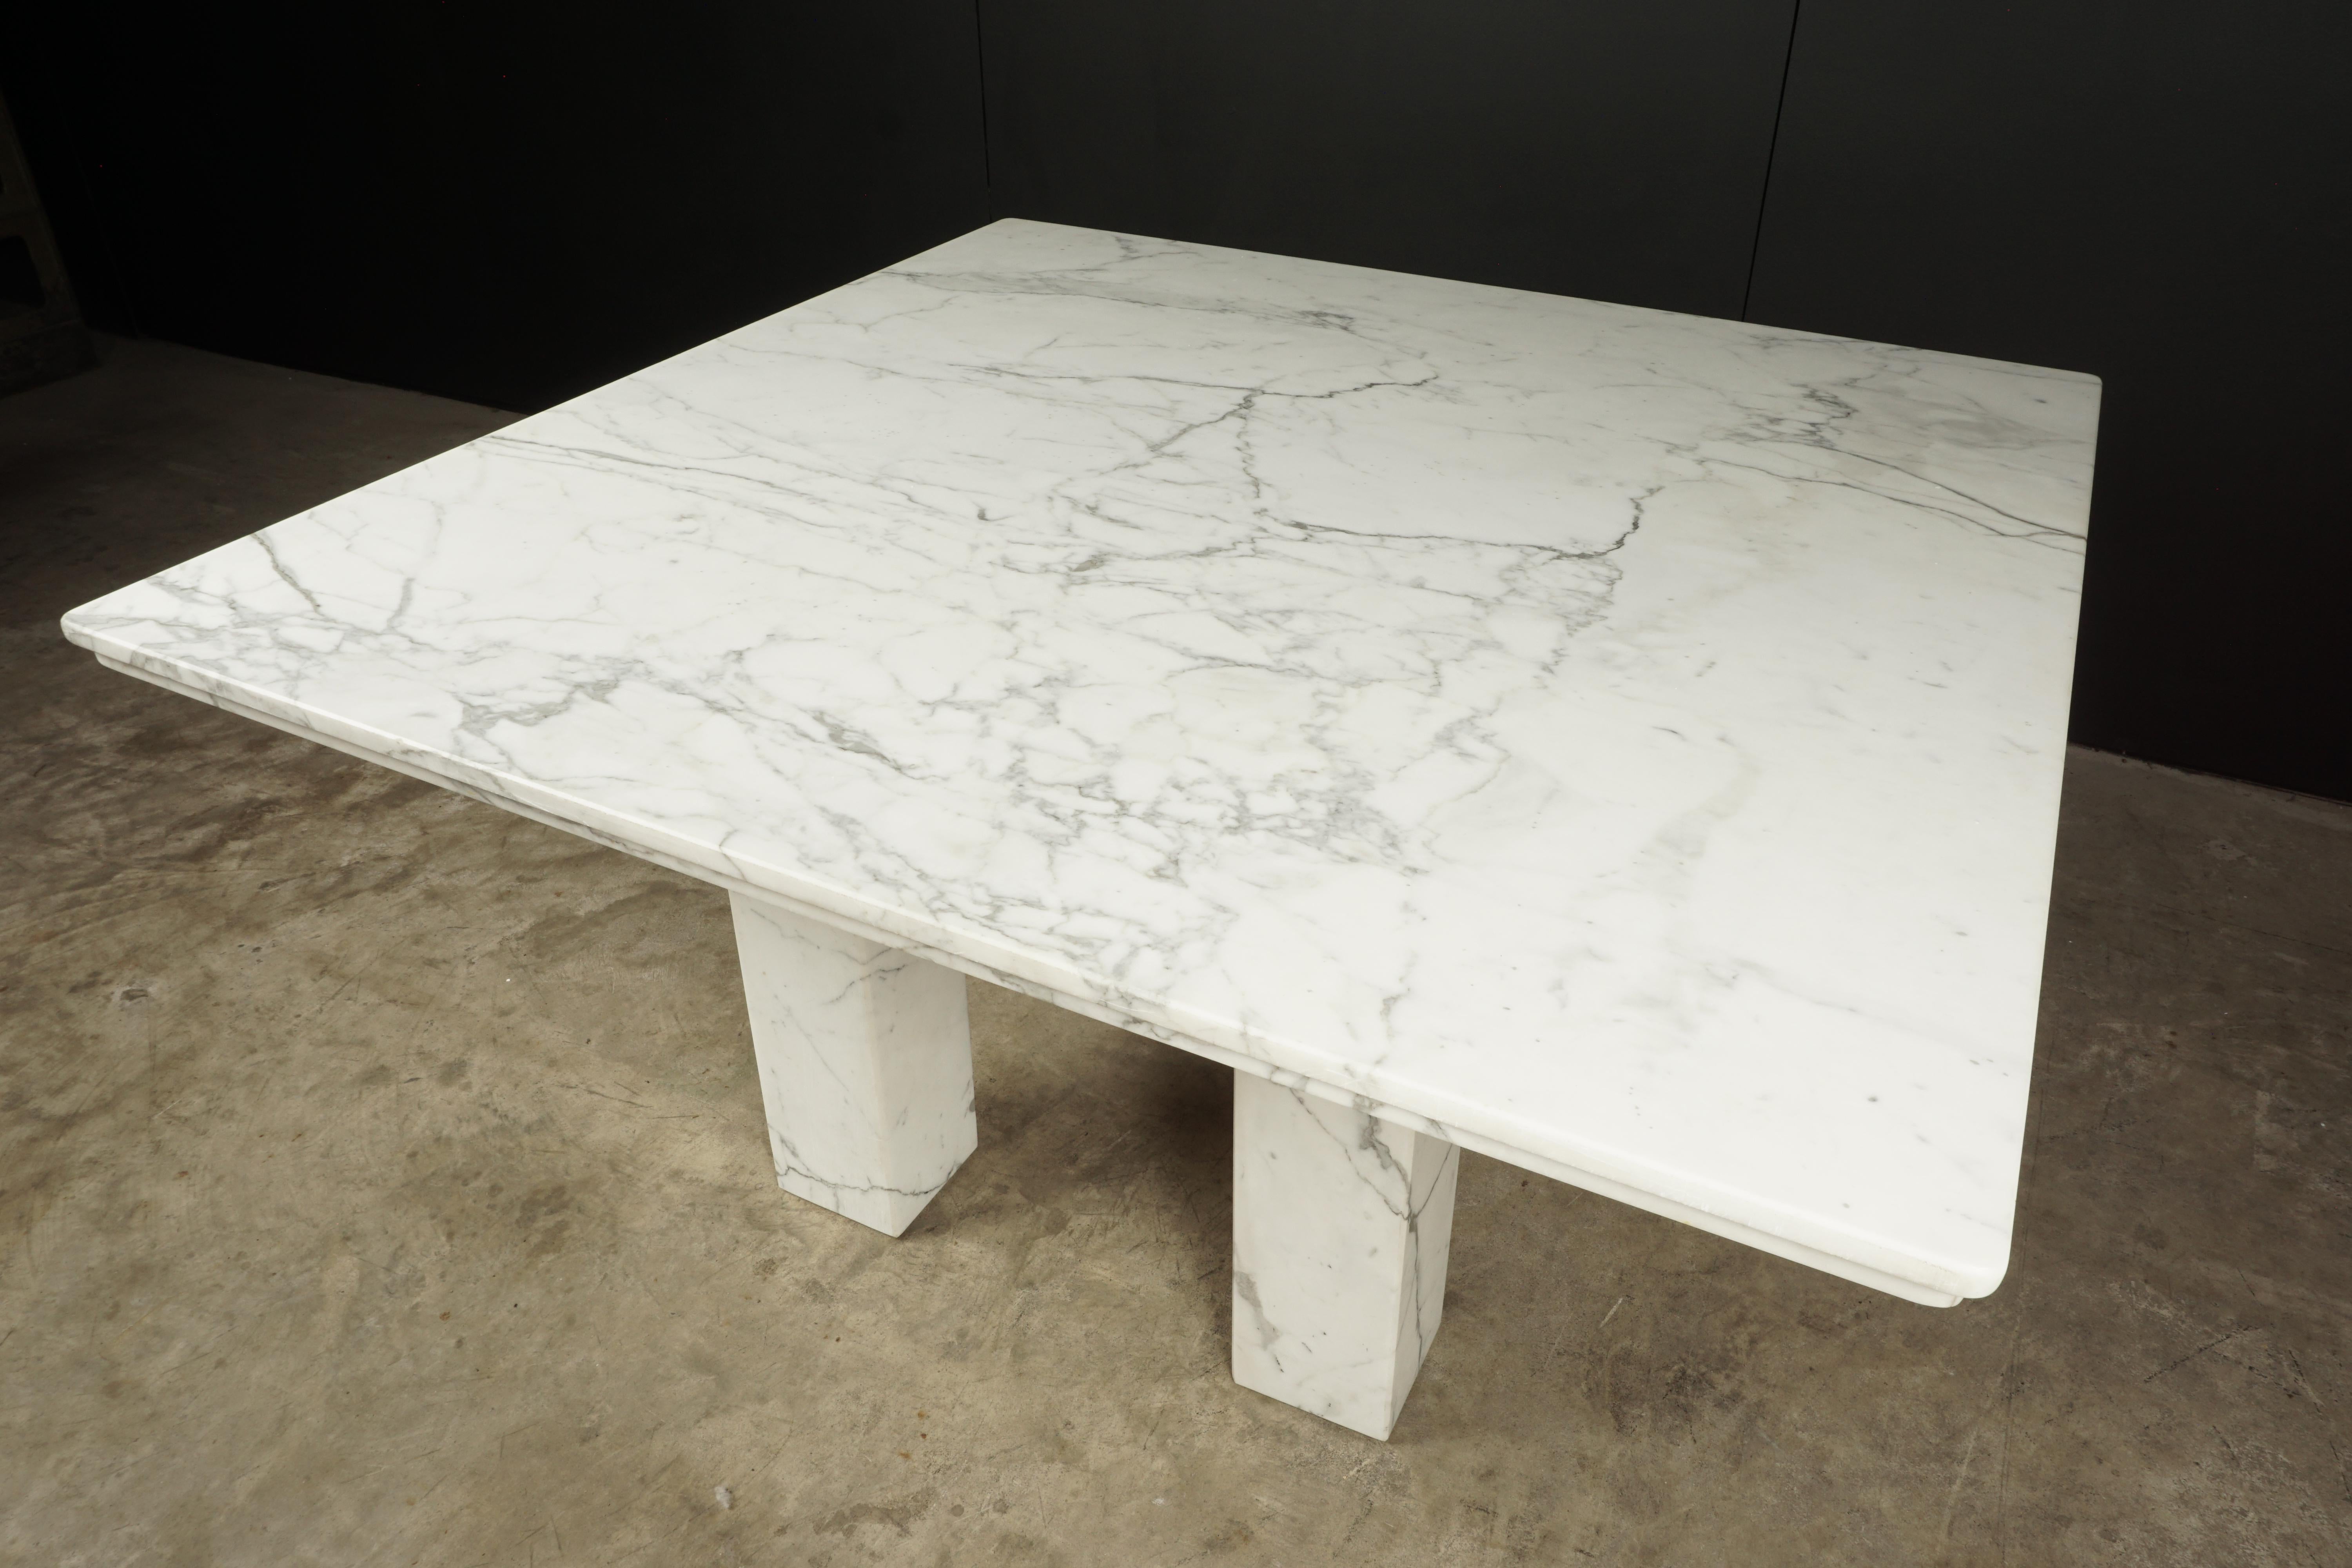 Large square marble dining table from France, circa 1960. Solid marble top and legs with light wear and use.